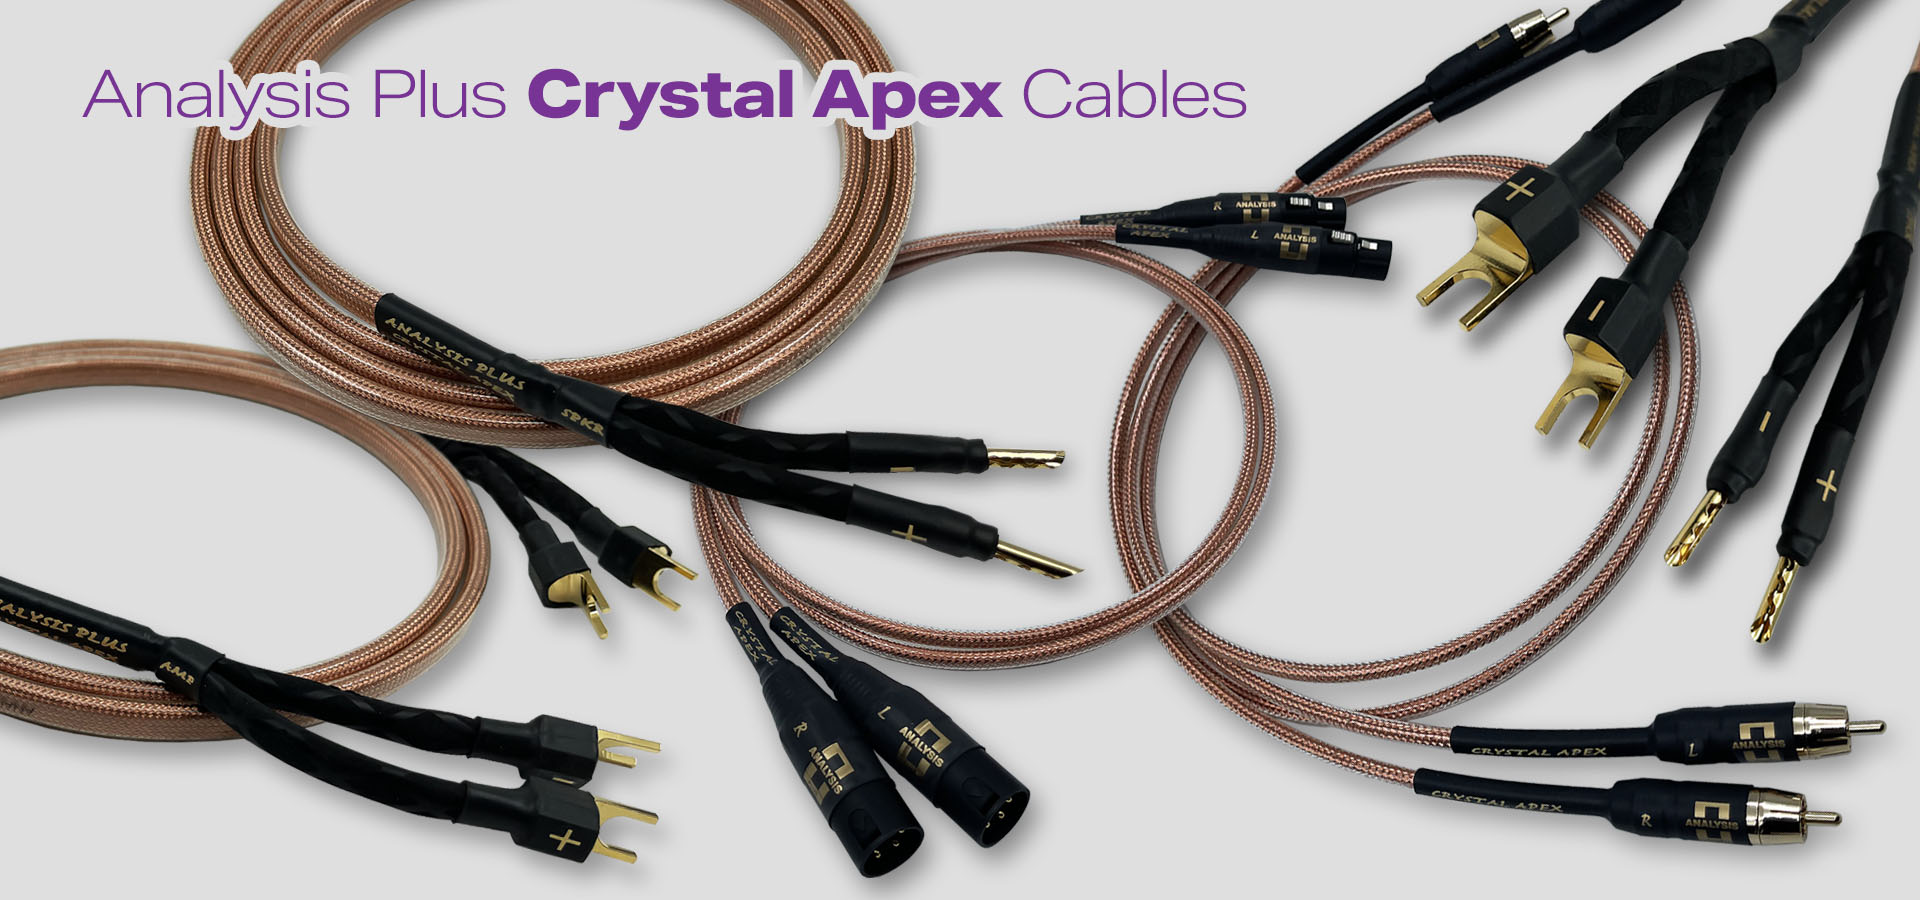 Crystal Apex Cables